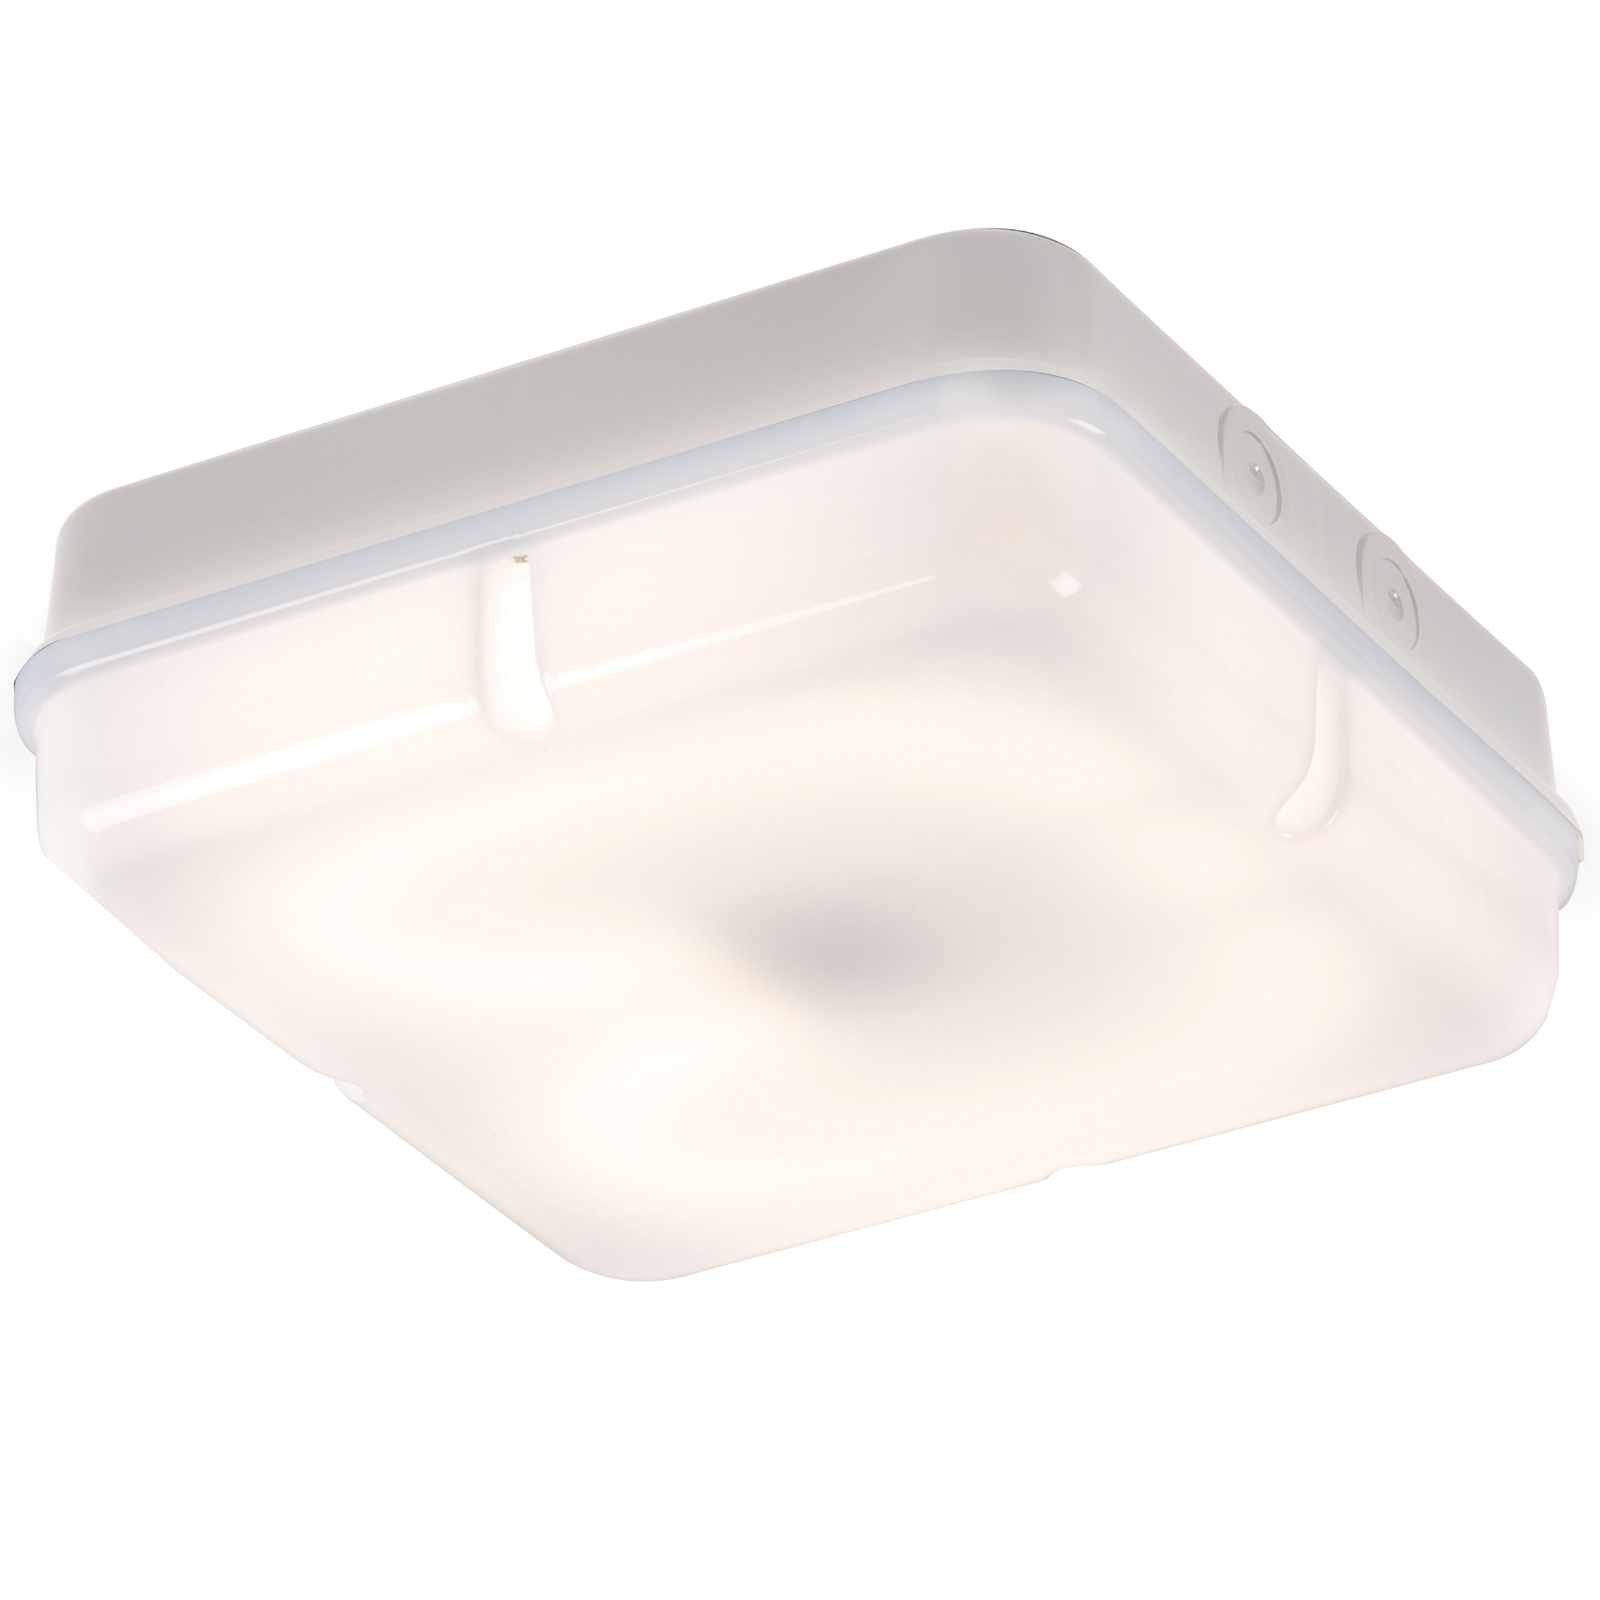 IP65 28W HF Square Bulkhead With Opal Diffuser And White Base - TPS28WOHF 